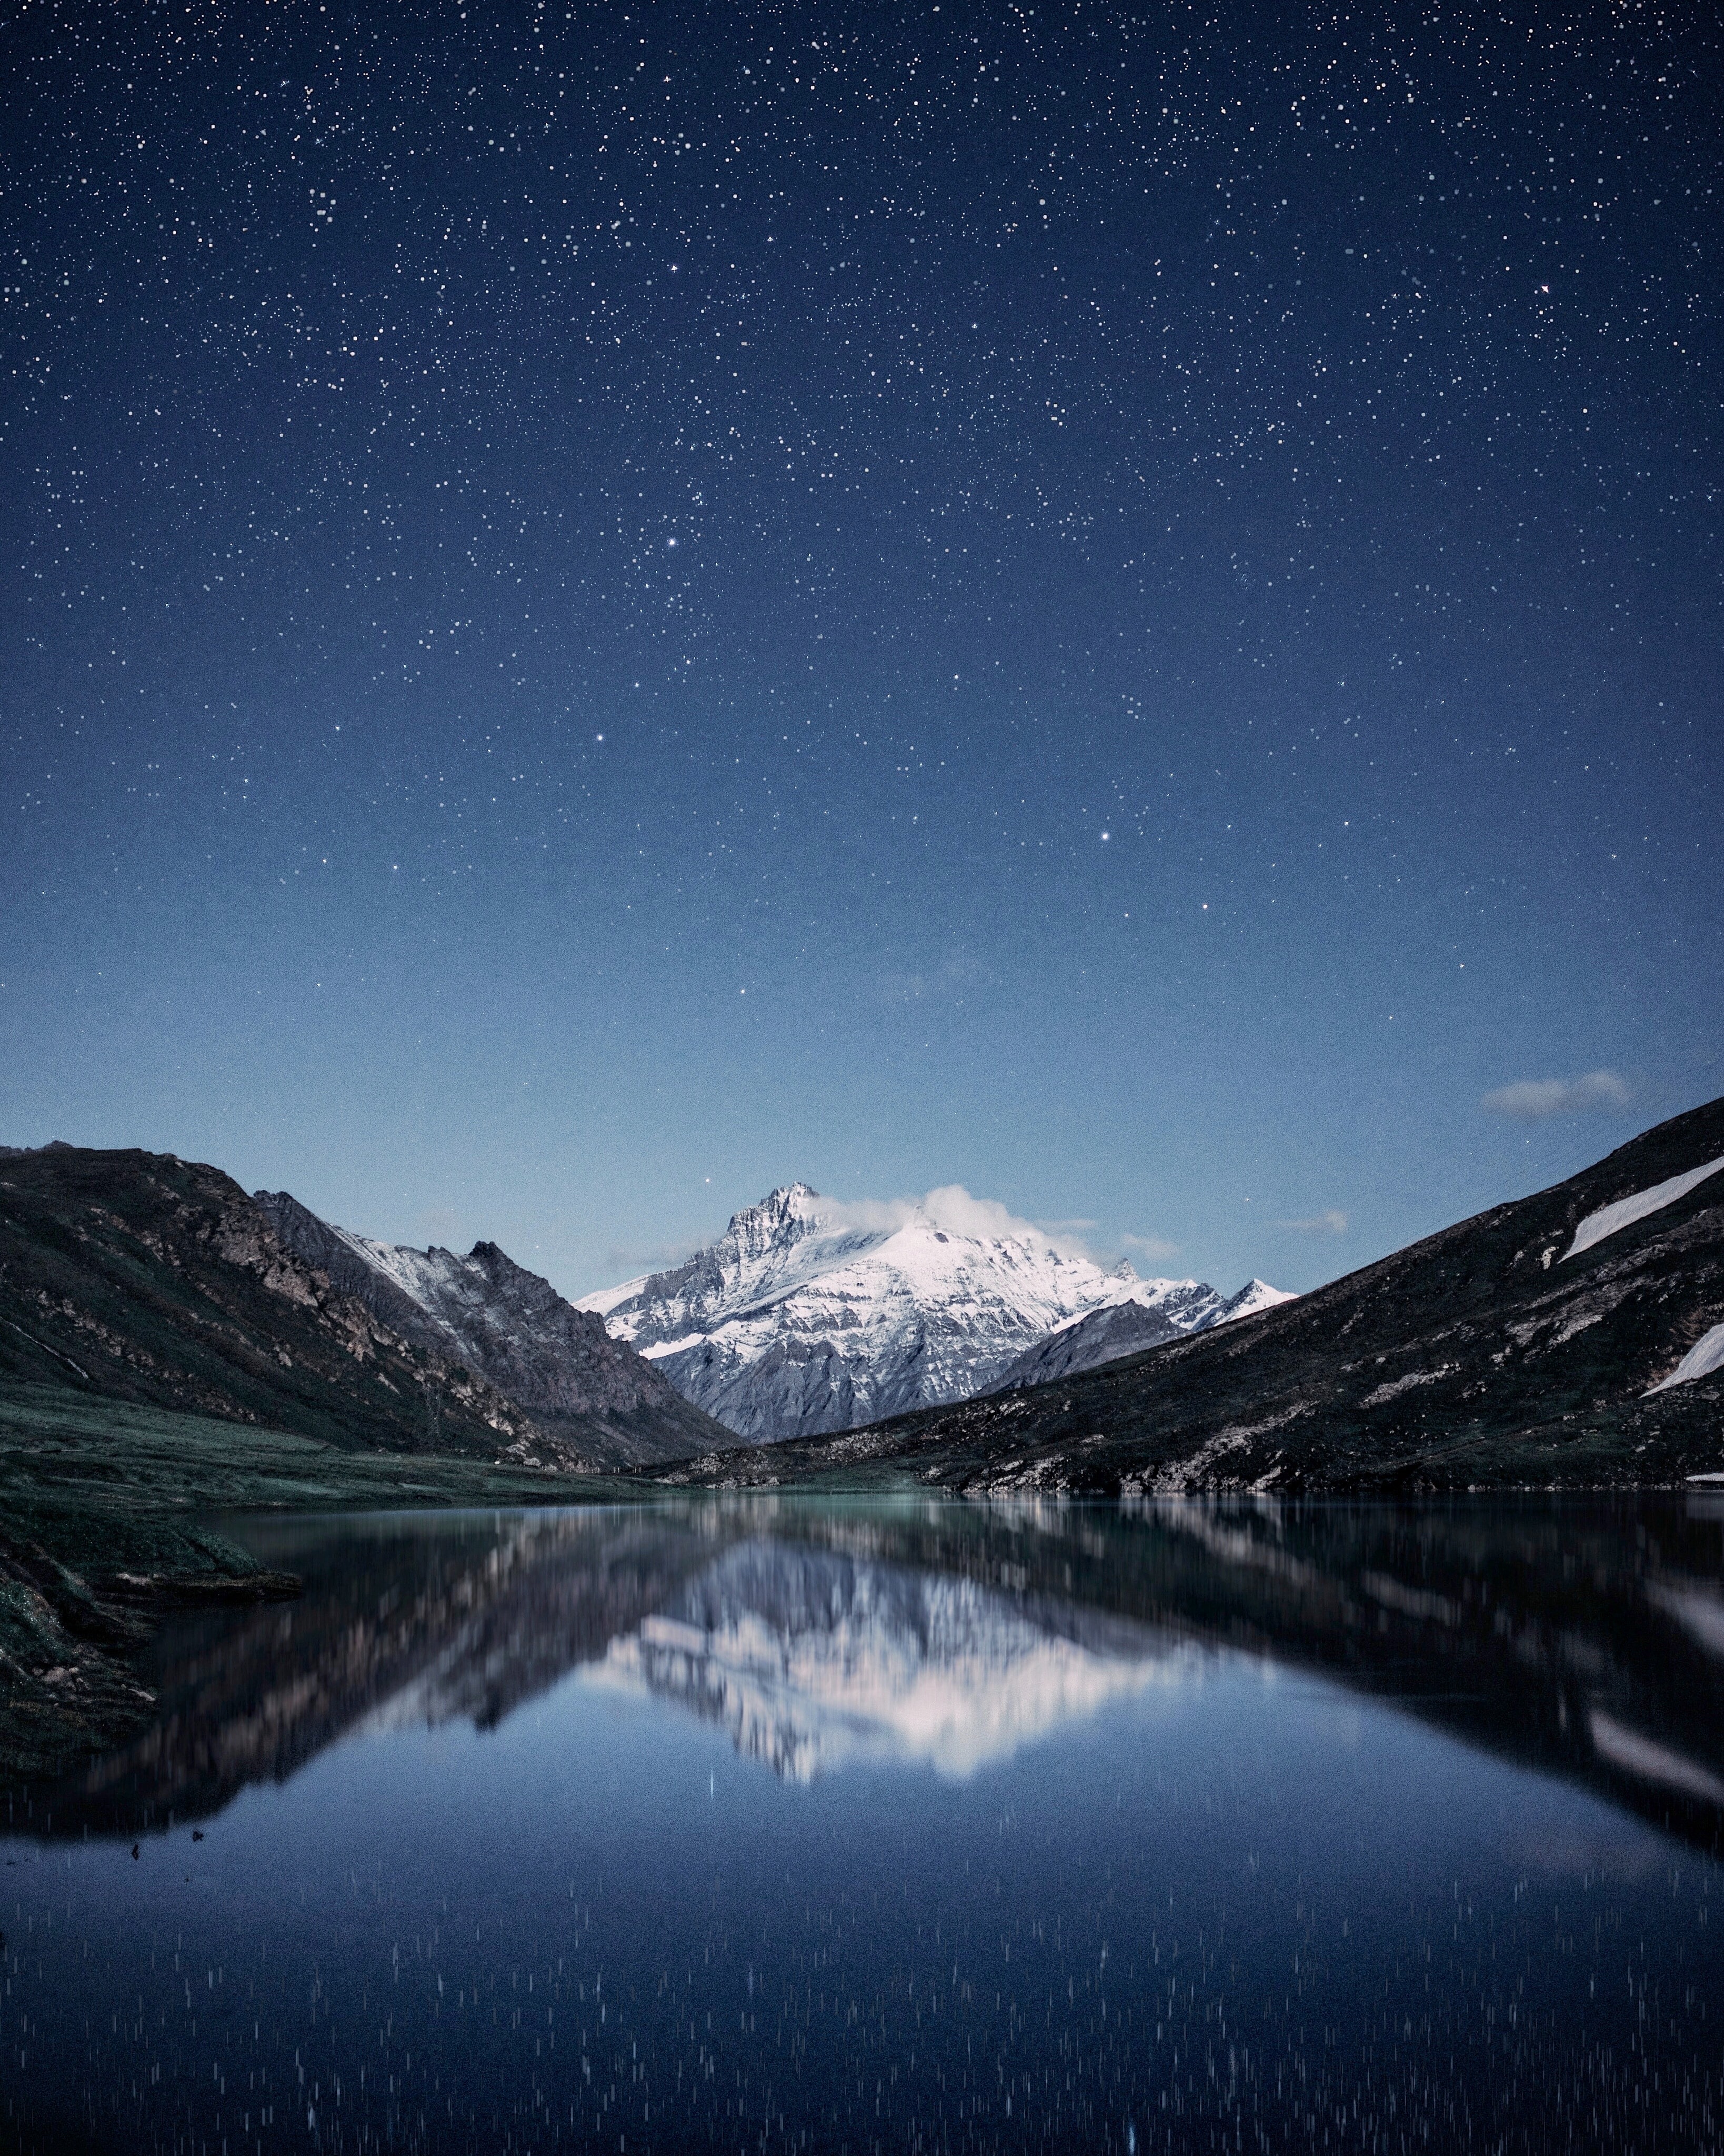 snowbound, snow covered, nature, mountains, night, reflection, starry sky